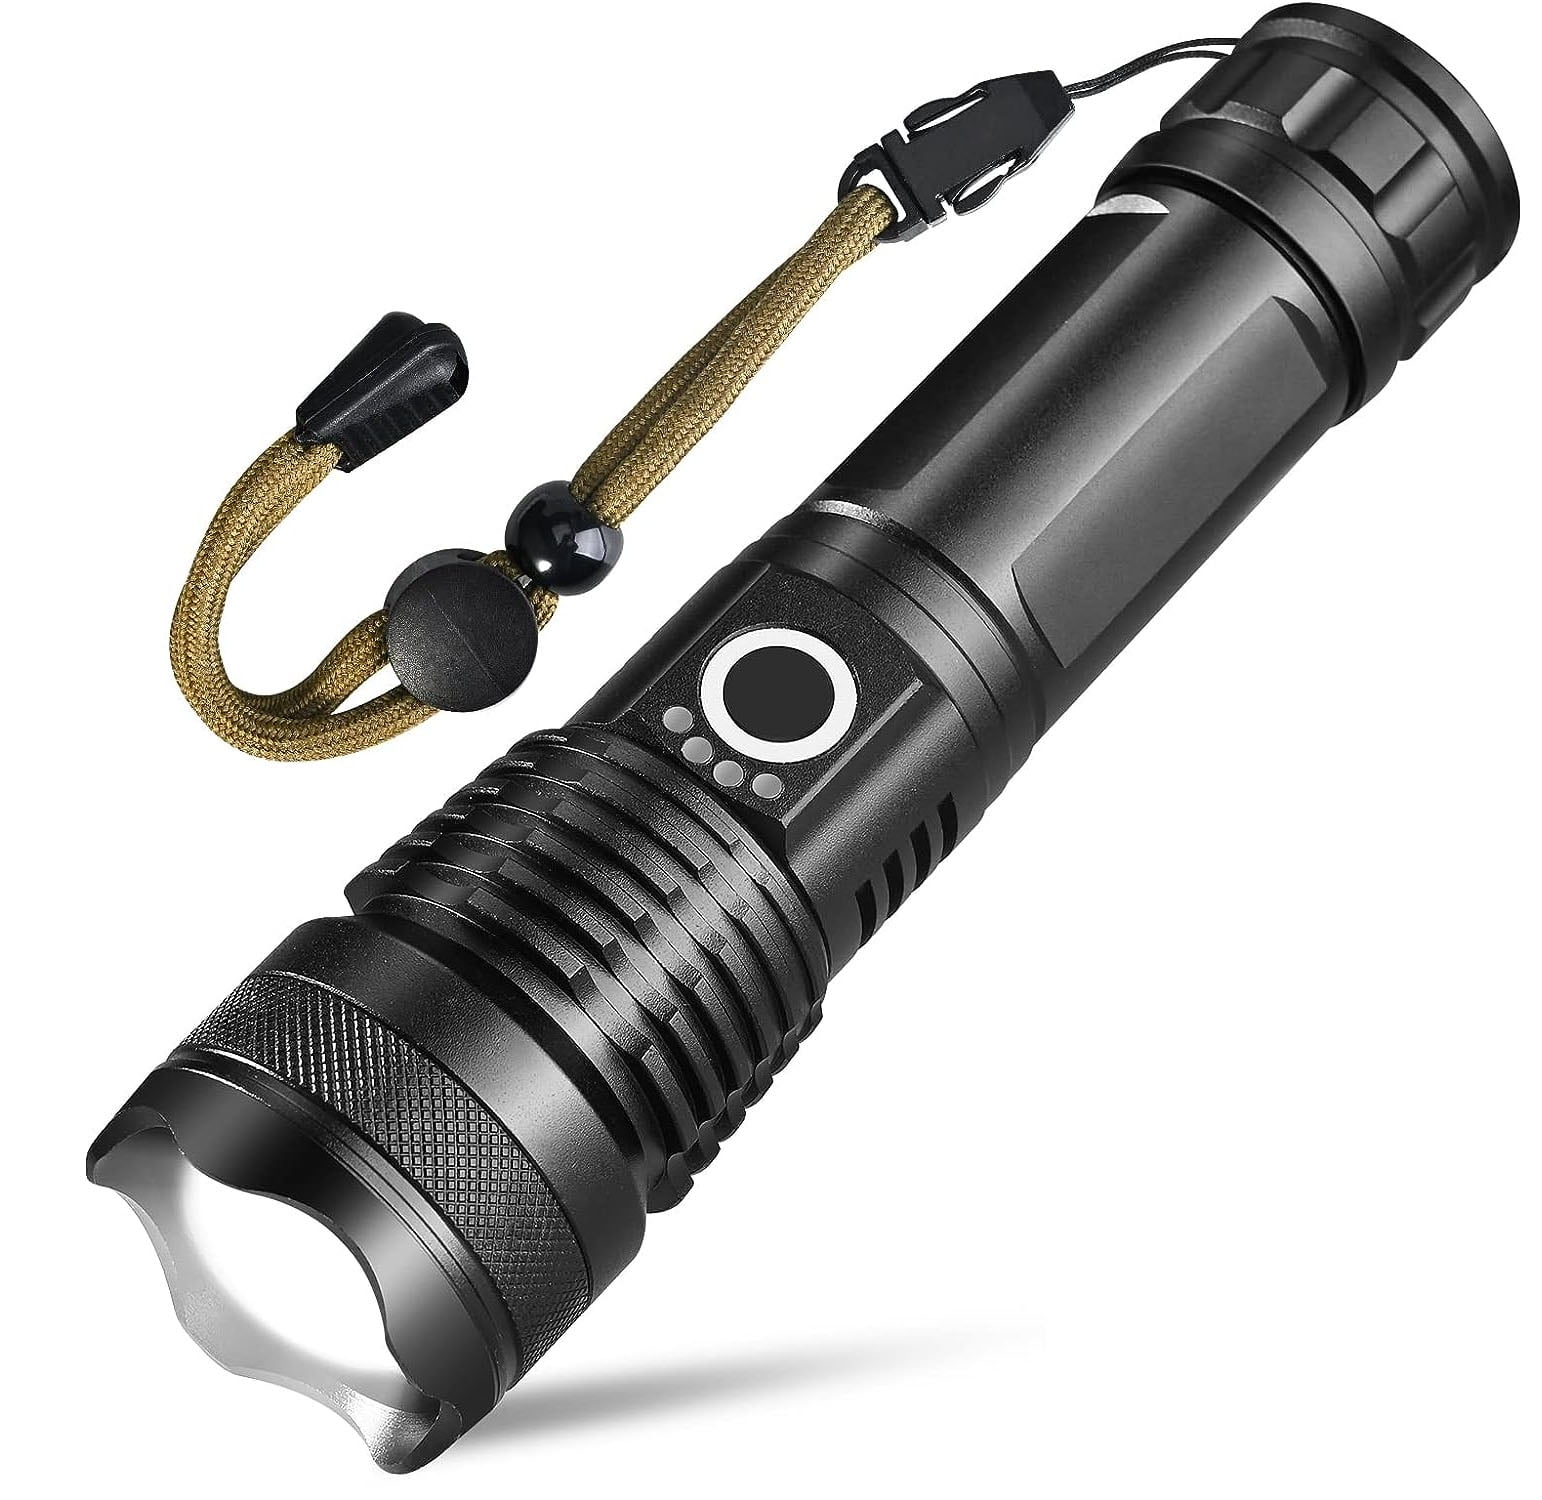 Sogidon Flashlights High Lumens Rechargeable, 900000 Lumen Super Bright Led  Tactical Flashlight Battery Powered with 7 Light Modes, USB C, Waterproof